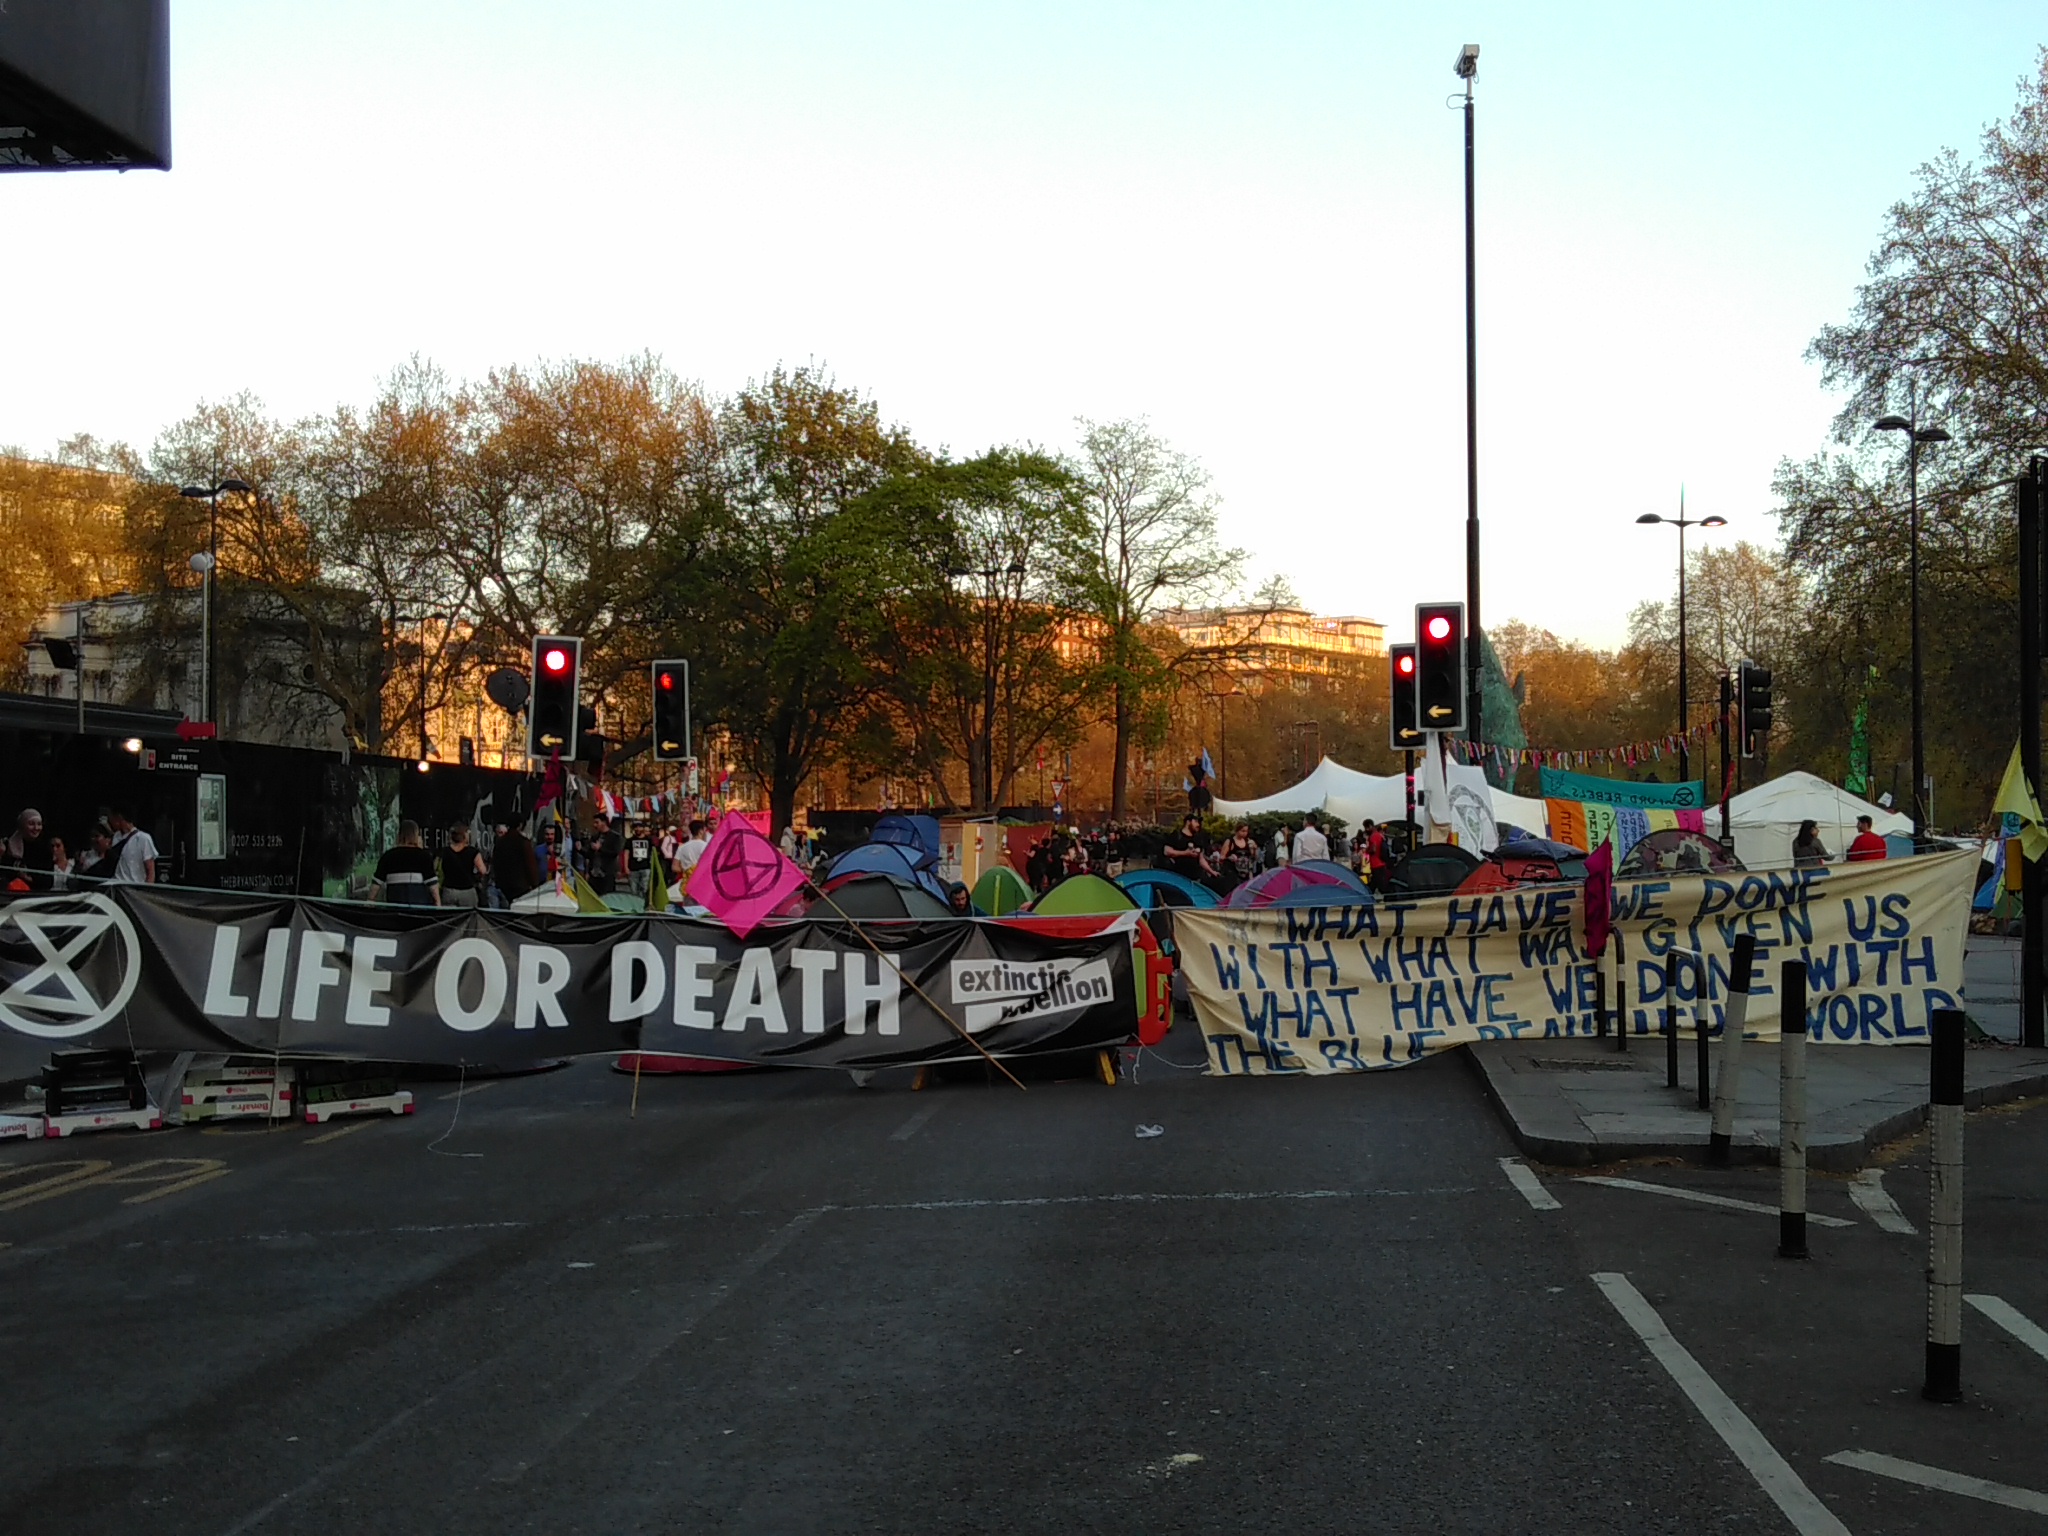 Marble Arch with banners